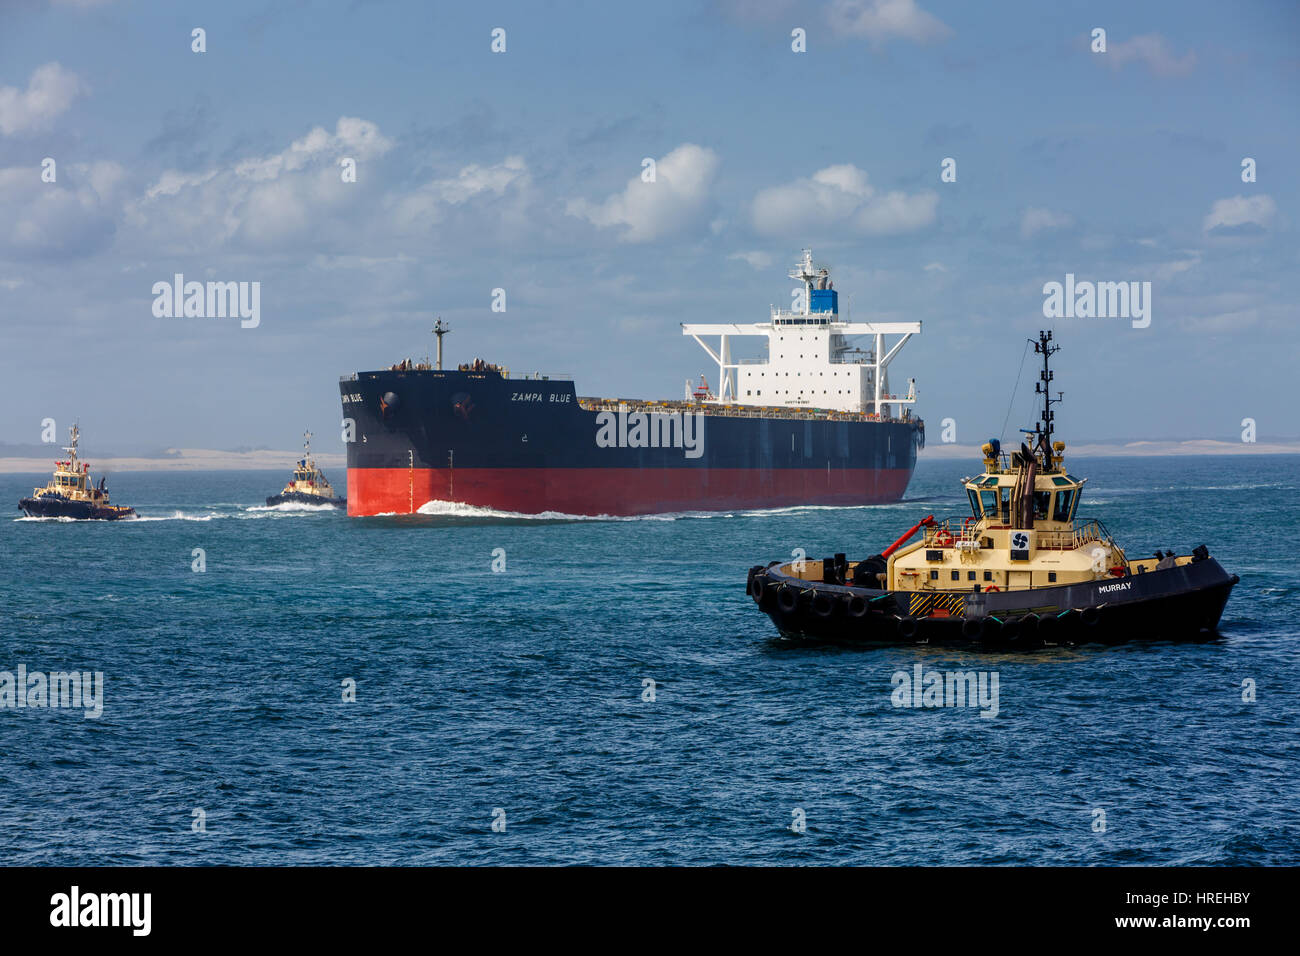 Bulk carrier Zamba Blue entering the Port of Newcastle in new south wales,australia Stock Photo